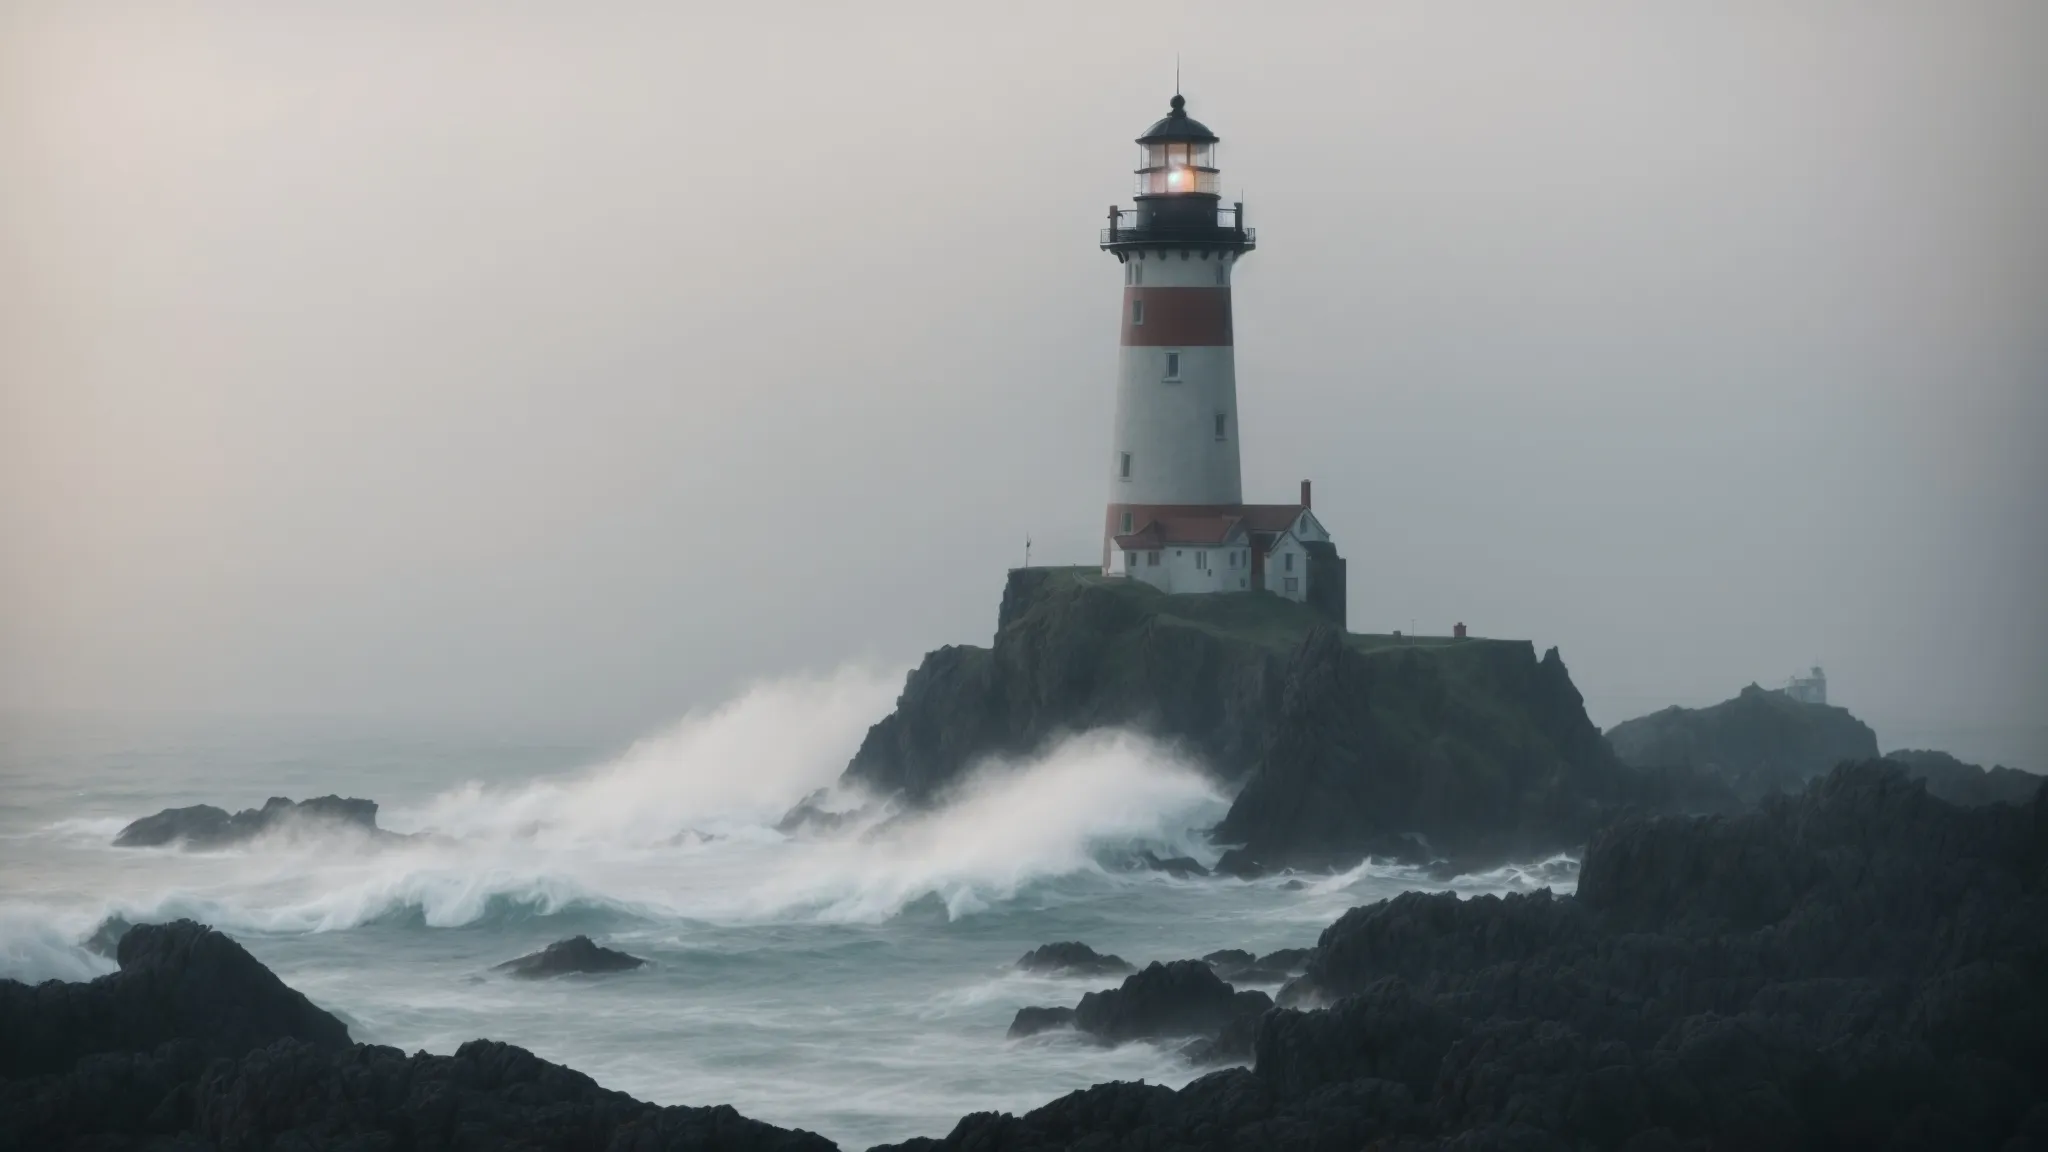 a lighthouse stands tall on a rocky coastline, its beam cutting through the fog to guide ships safely to shore.